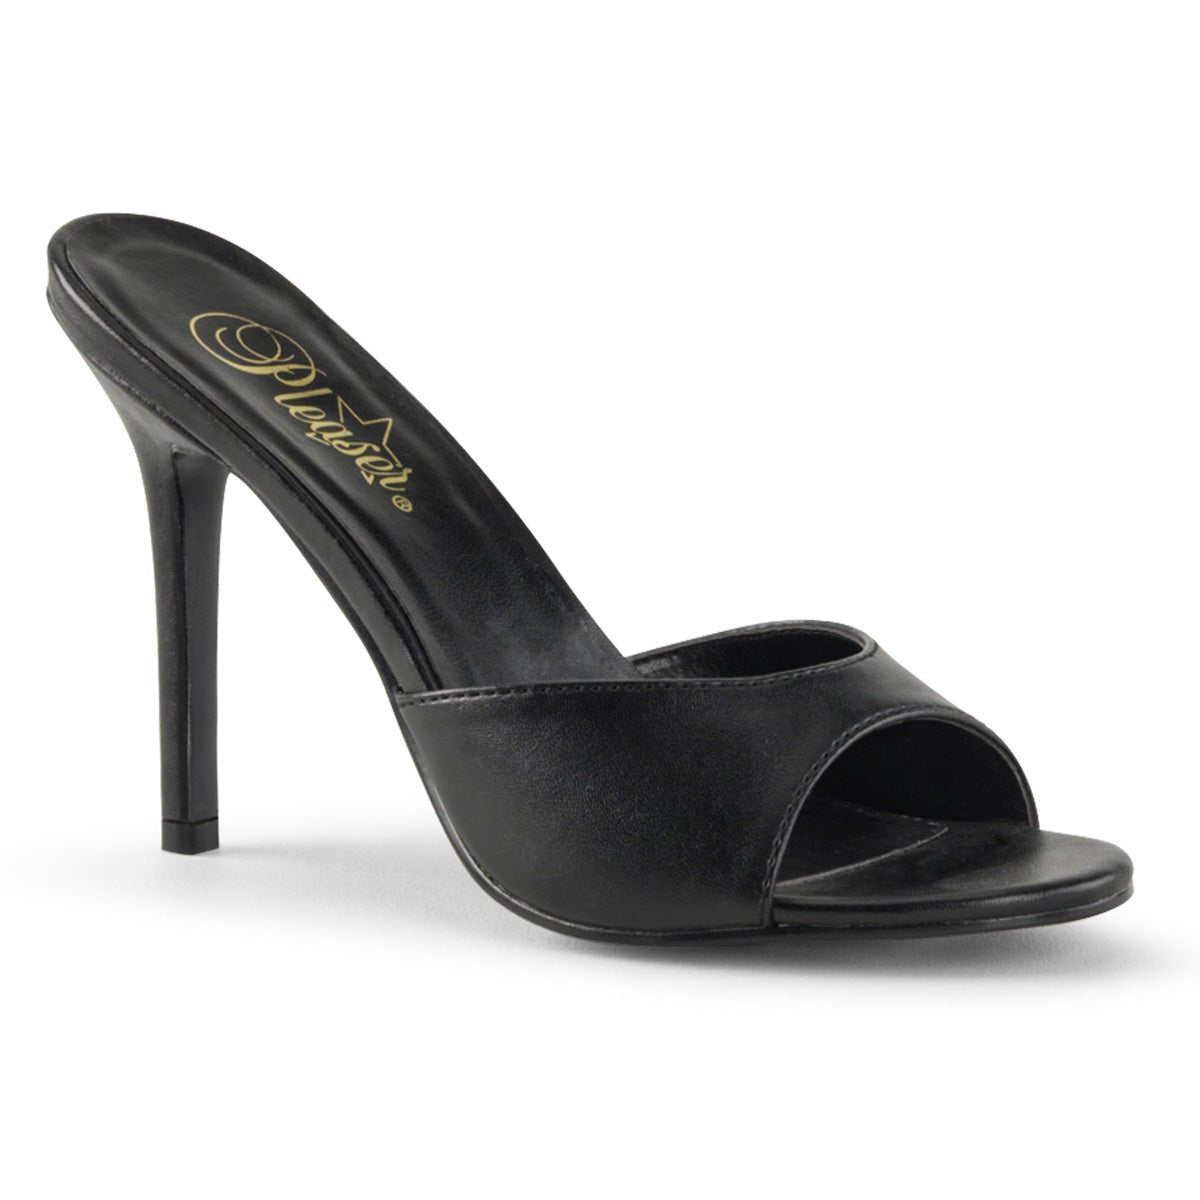 Clearance Pleaser Classique 01 Black Matt Size 3UK/6USA - From Clearance Sold By Alternative Footwear